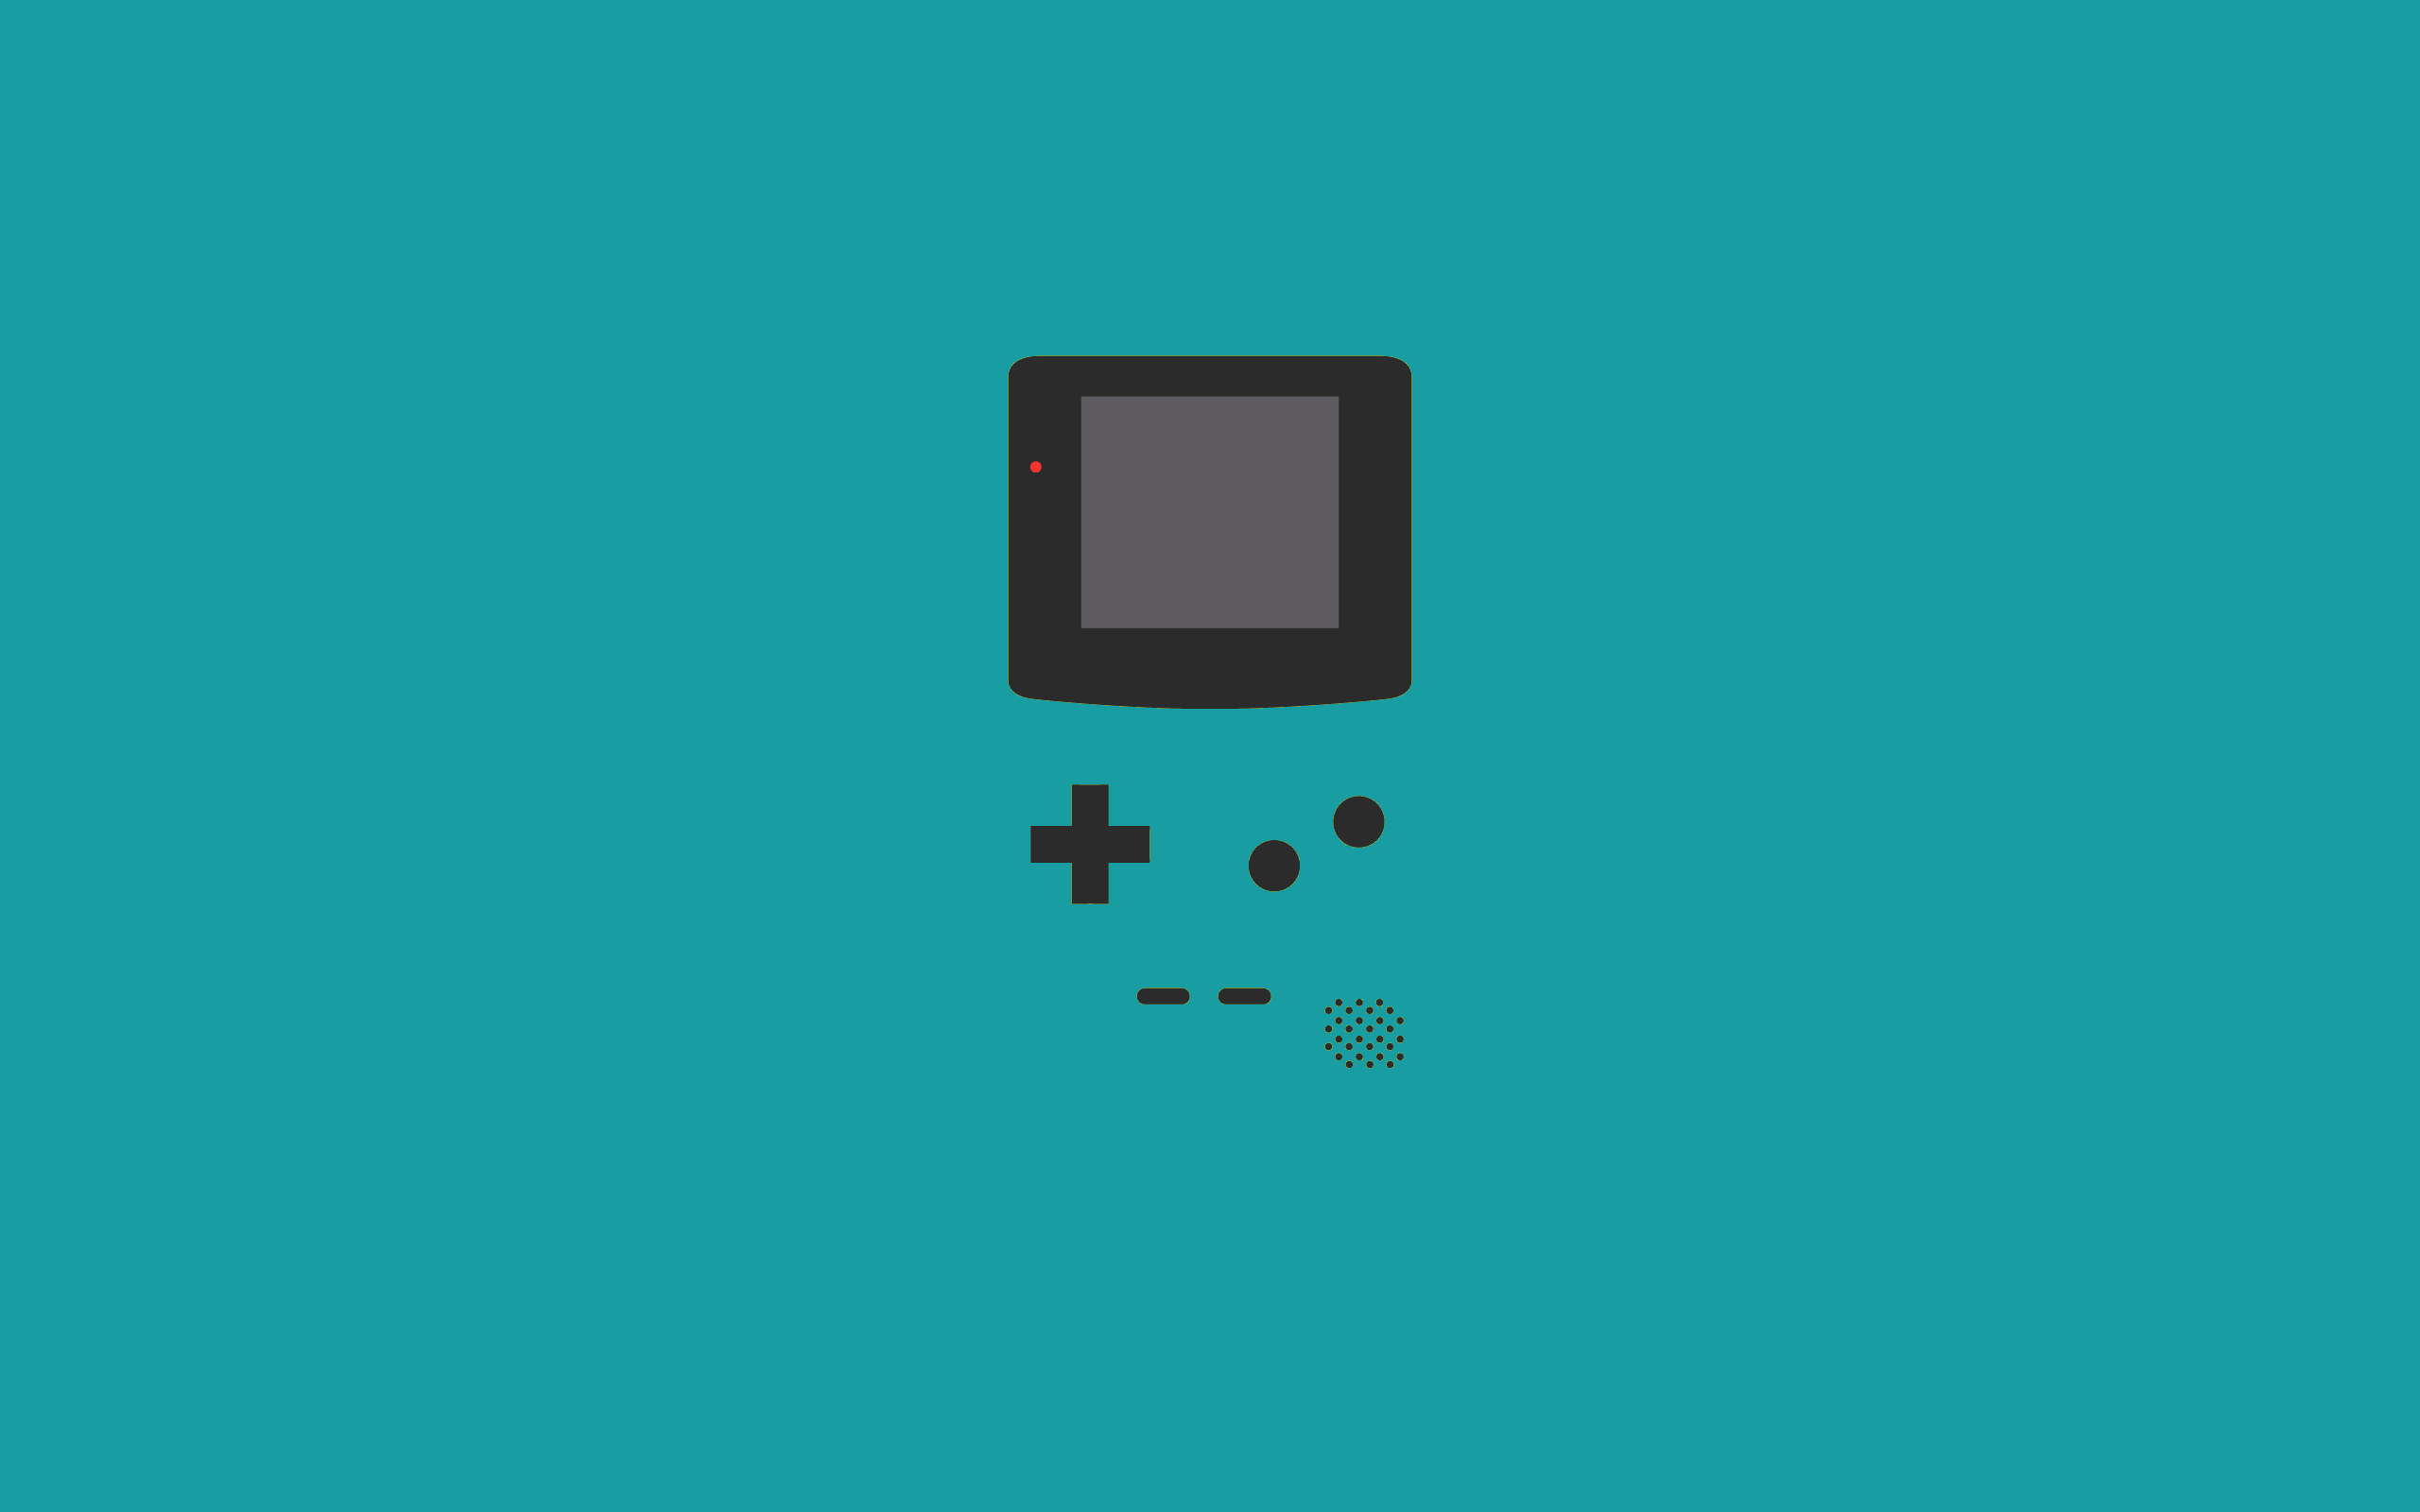 Video Game Art Video Games Minimalism Simple Background Turquise Background 2560x1600